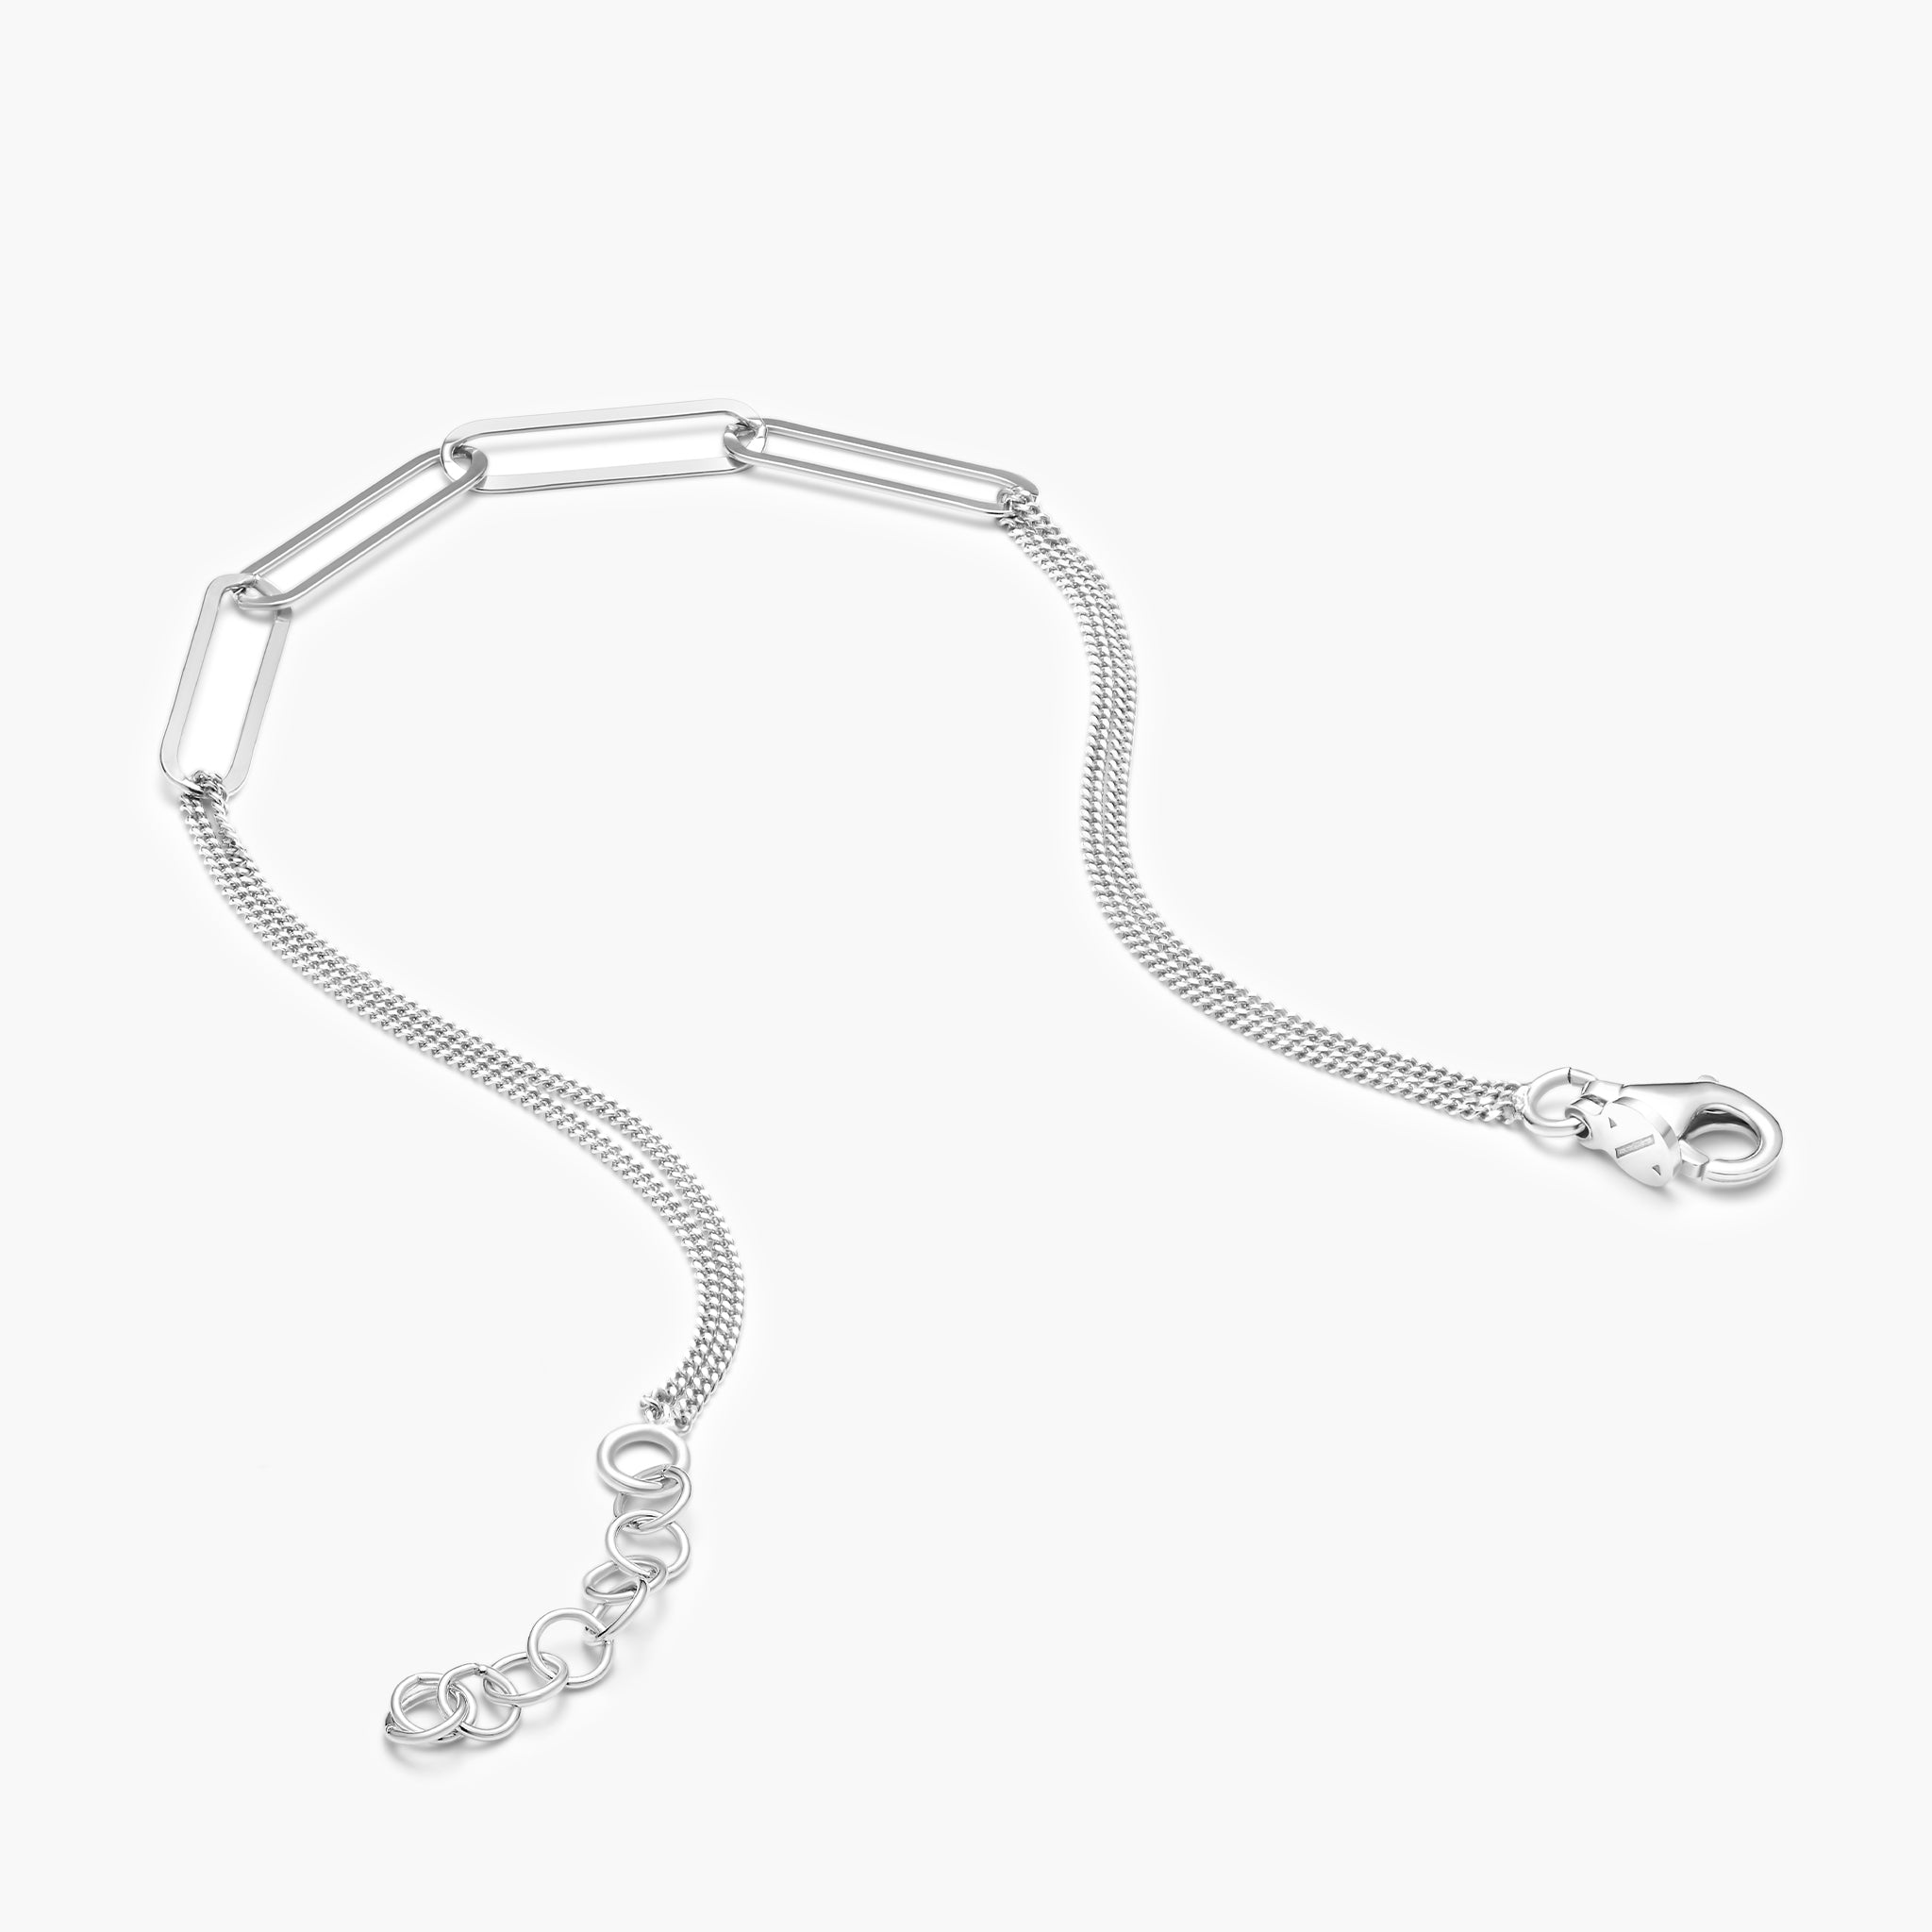 Compare prices for Chain Links Patches Bracelet (MP2449) in